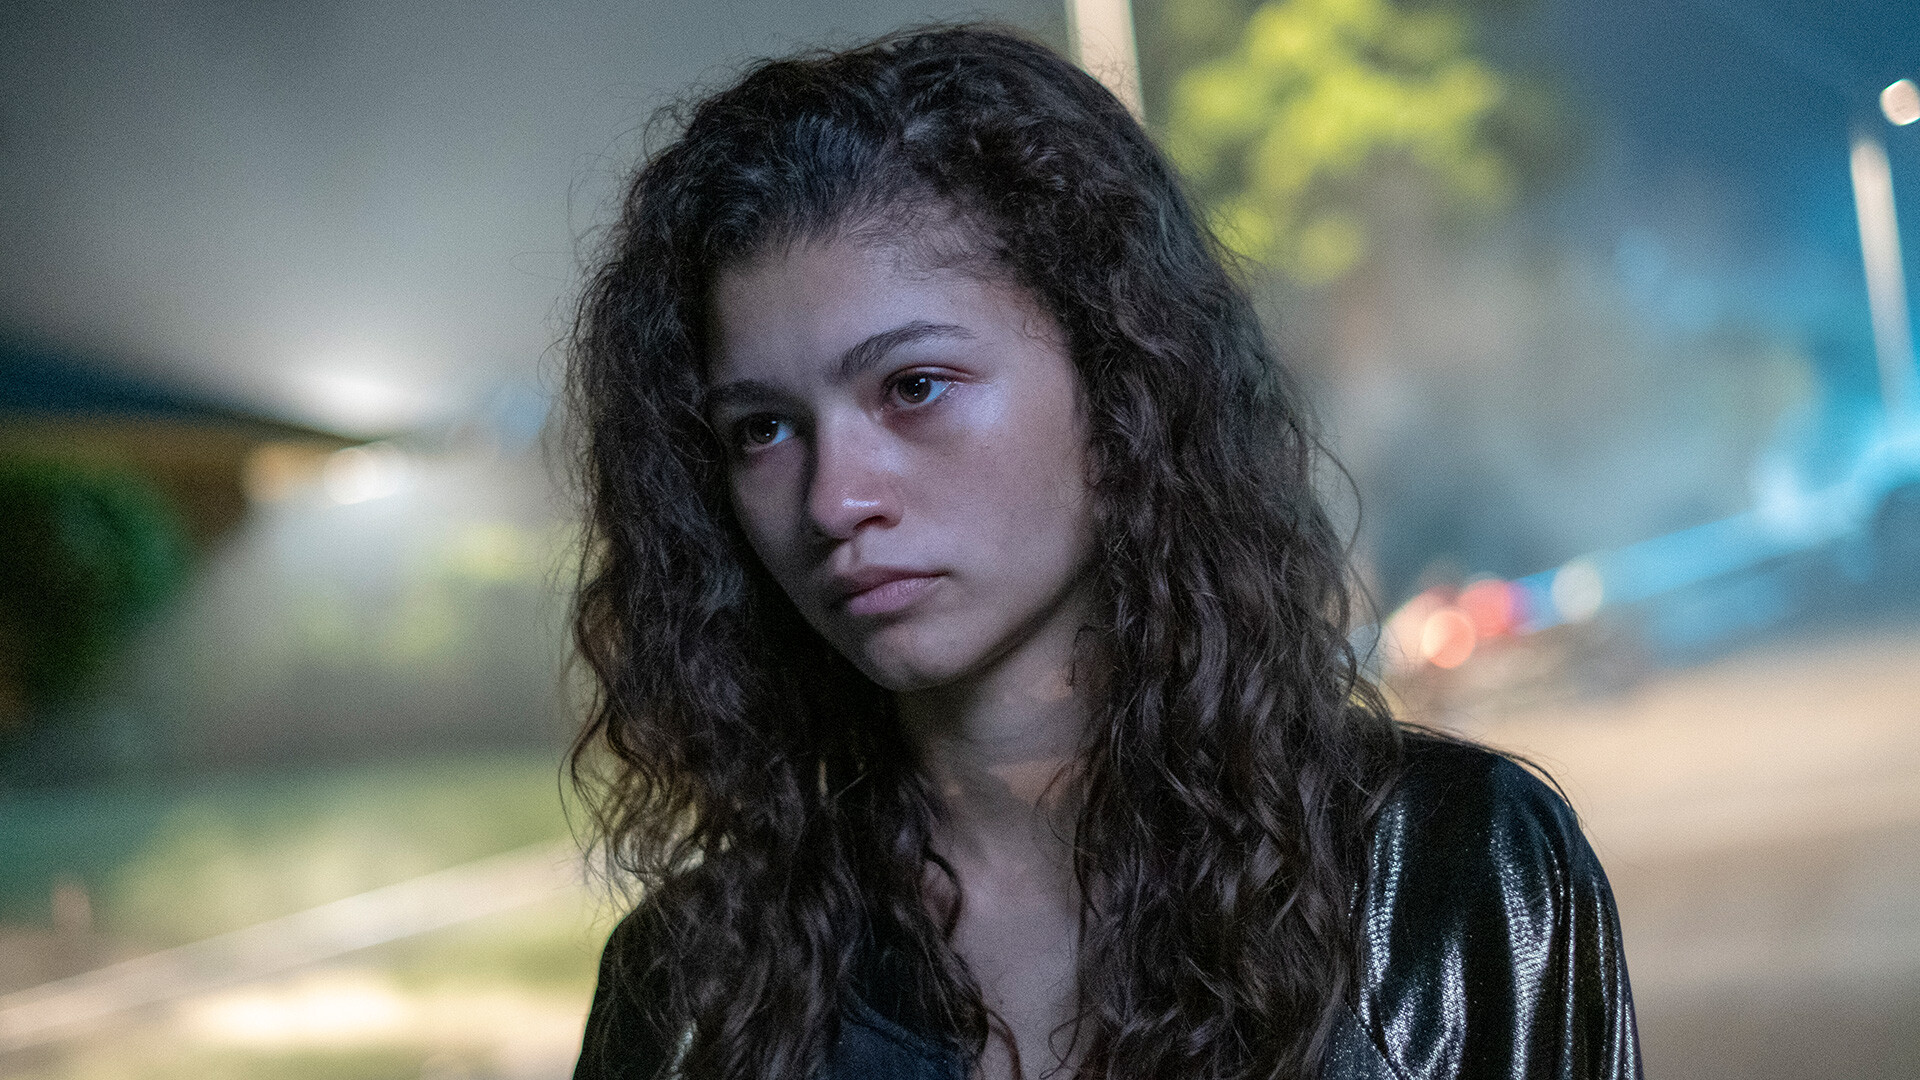 Euphoria (TV Series): Zendaya, Named one of the 100 most influential people in the world on its annual list in 2022. 1920x1080 Full HD Background.